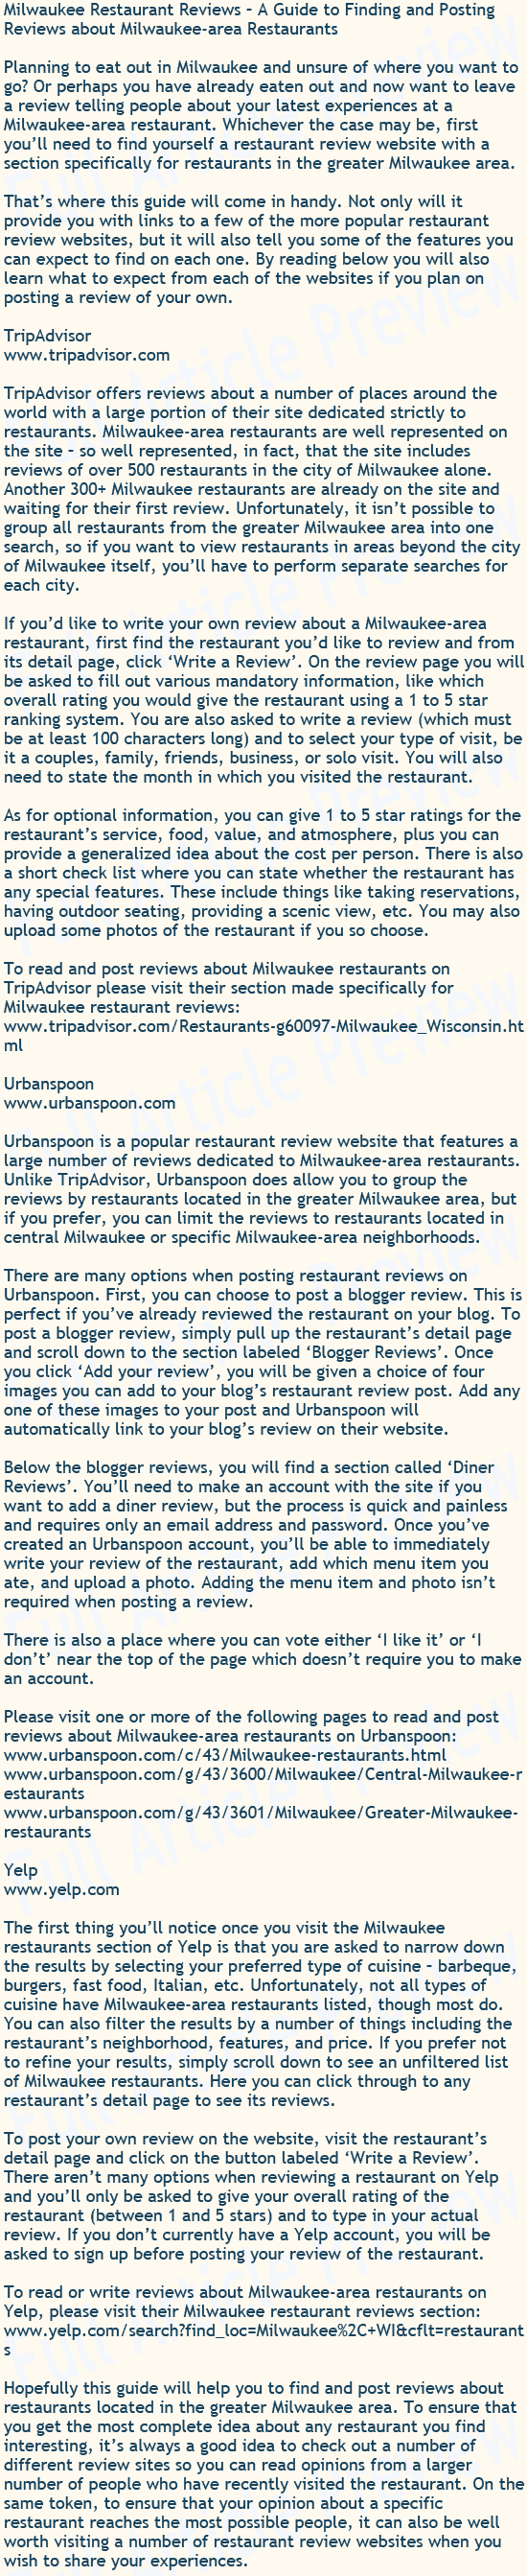 Buy articles about reading and writing reviews about Milwaukee-area restaurants for your website or blog.